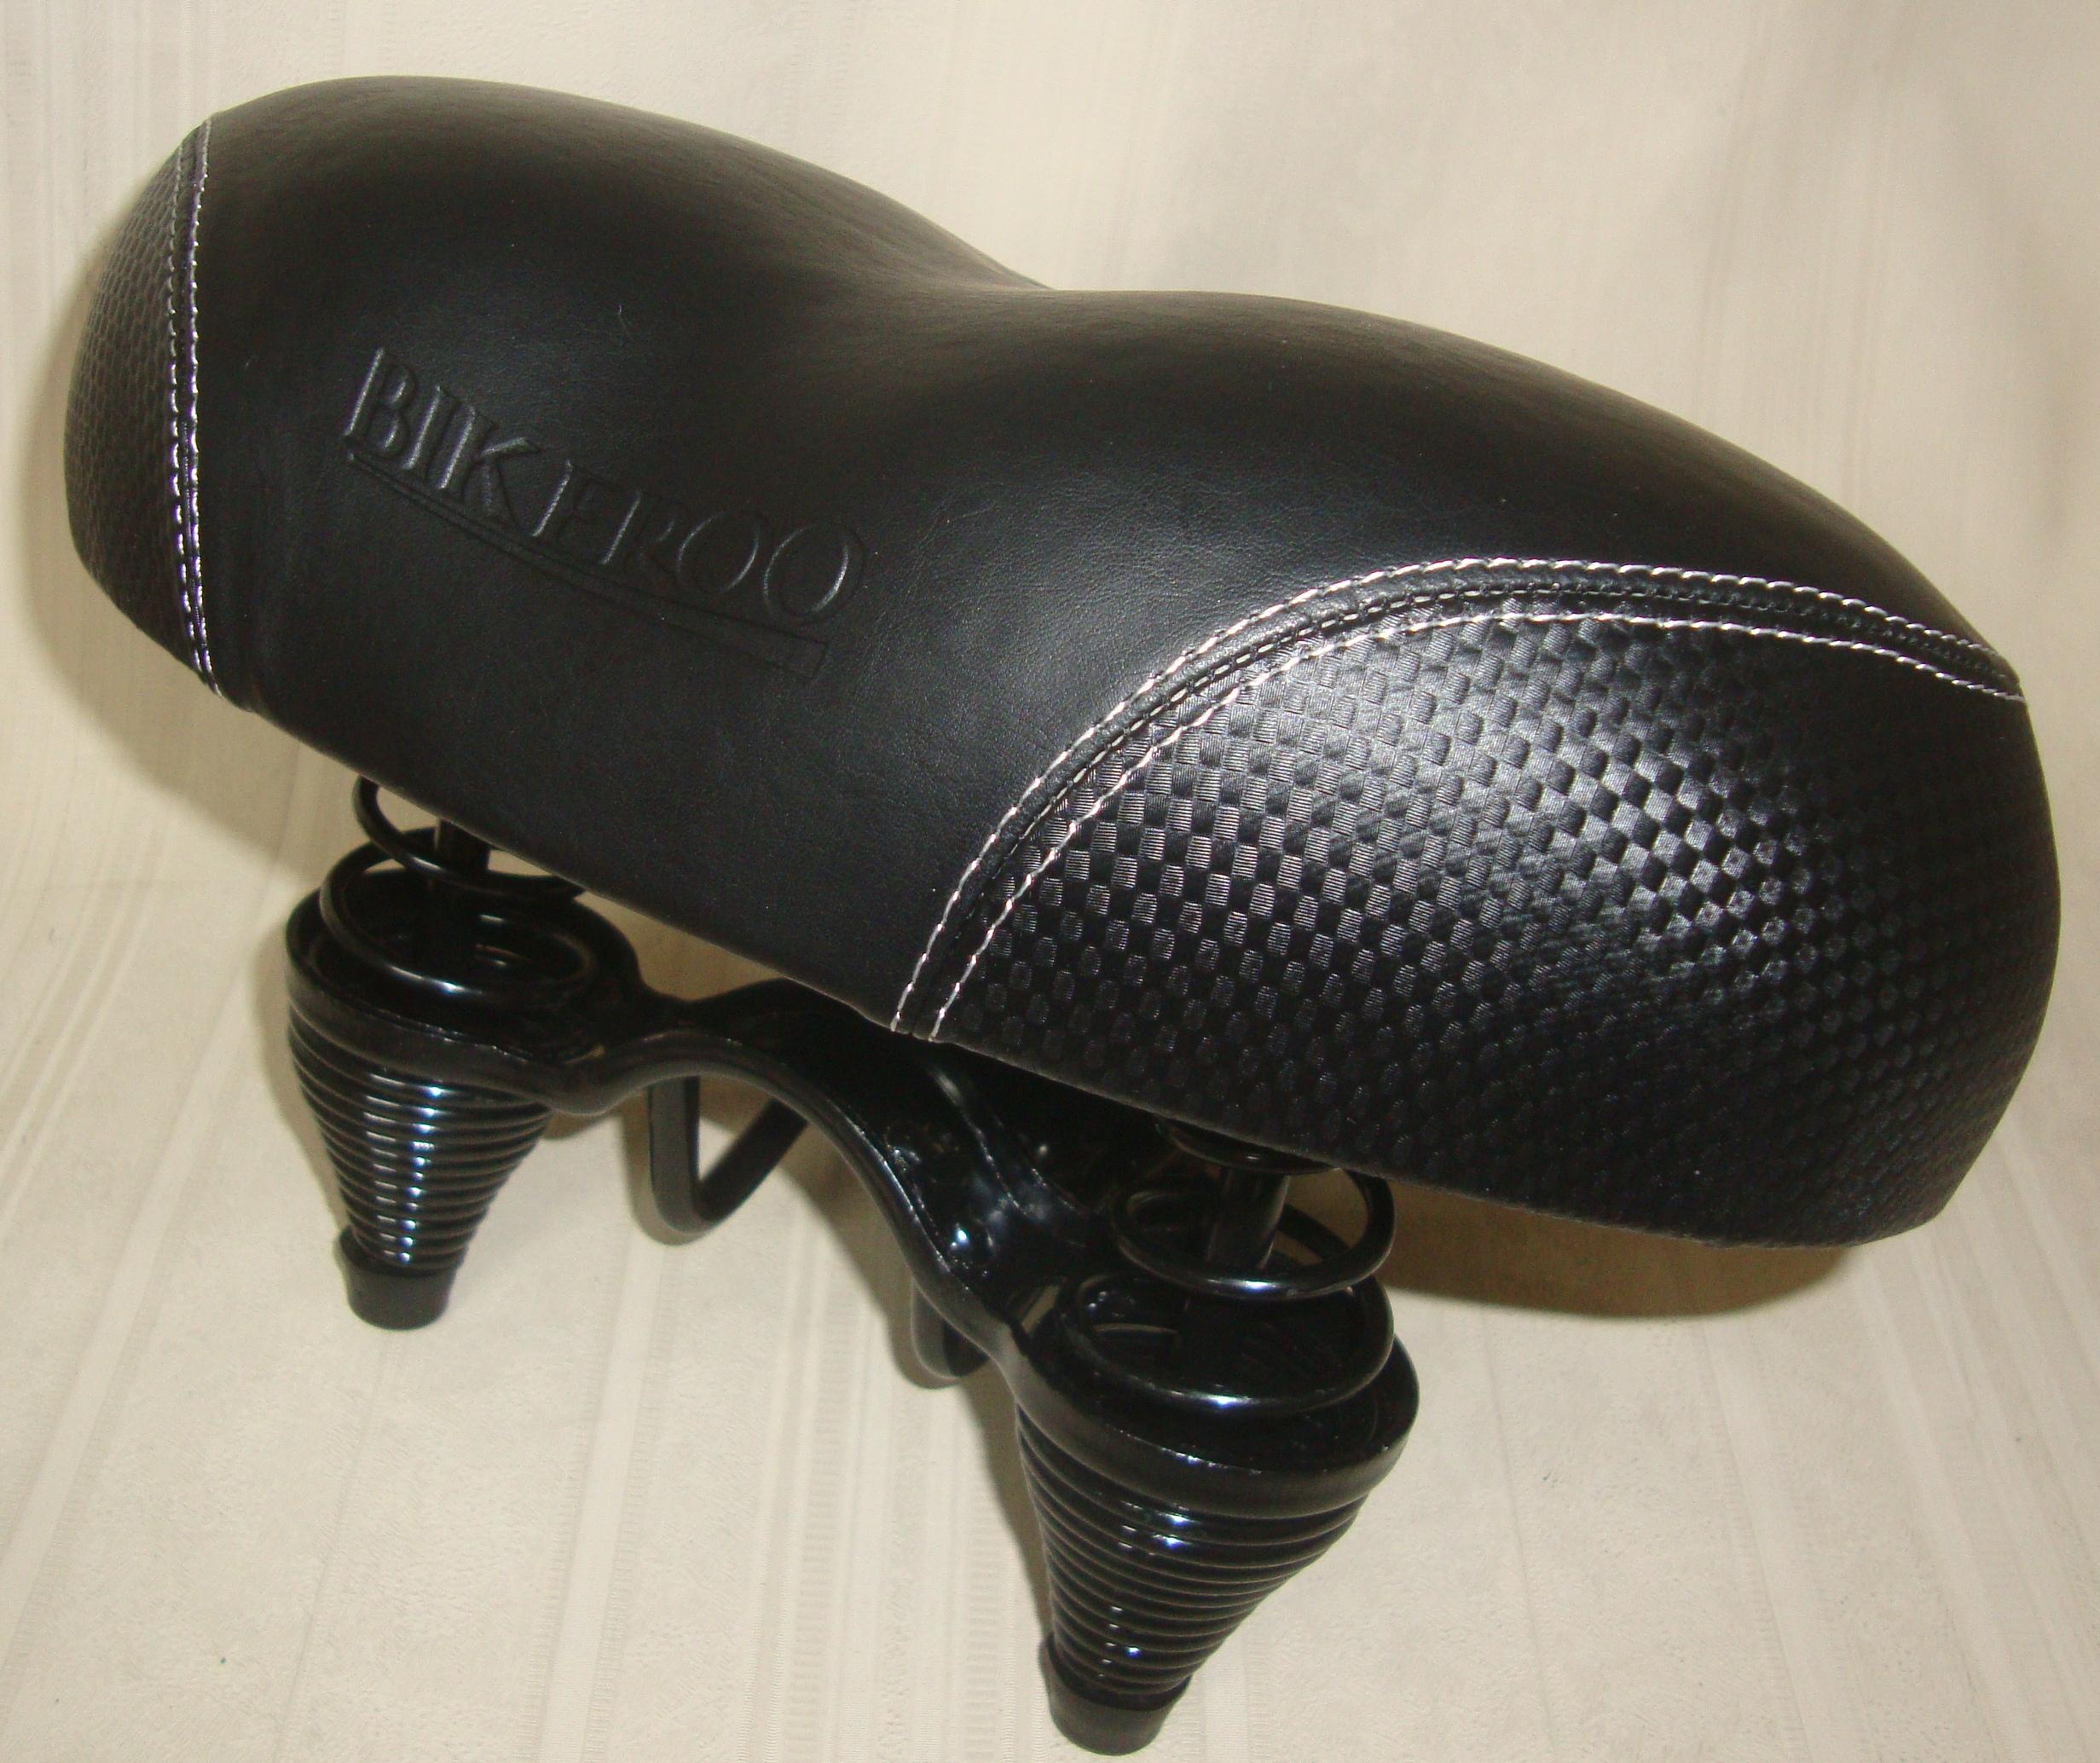 Bikeroo Bike Seat Comfortable Extra Wide and Padded Bicycle Saddle New. W/tools